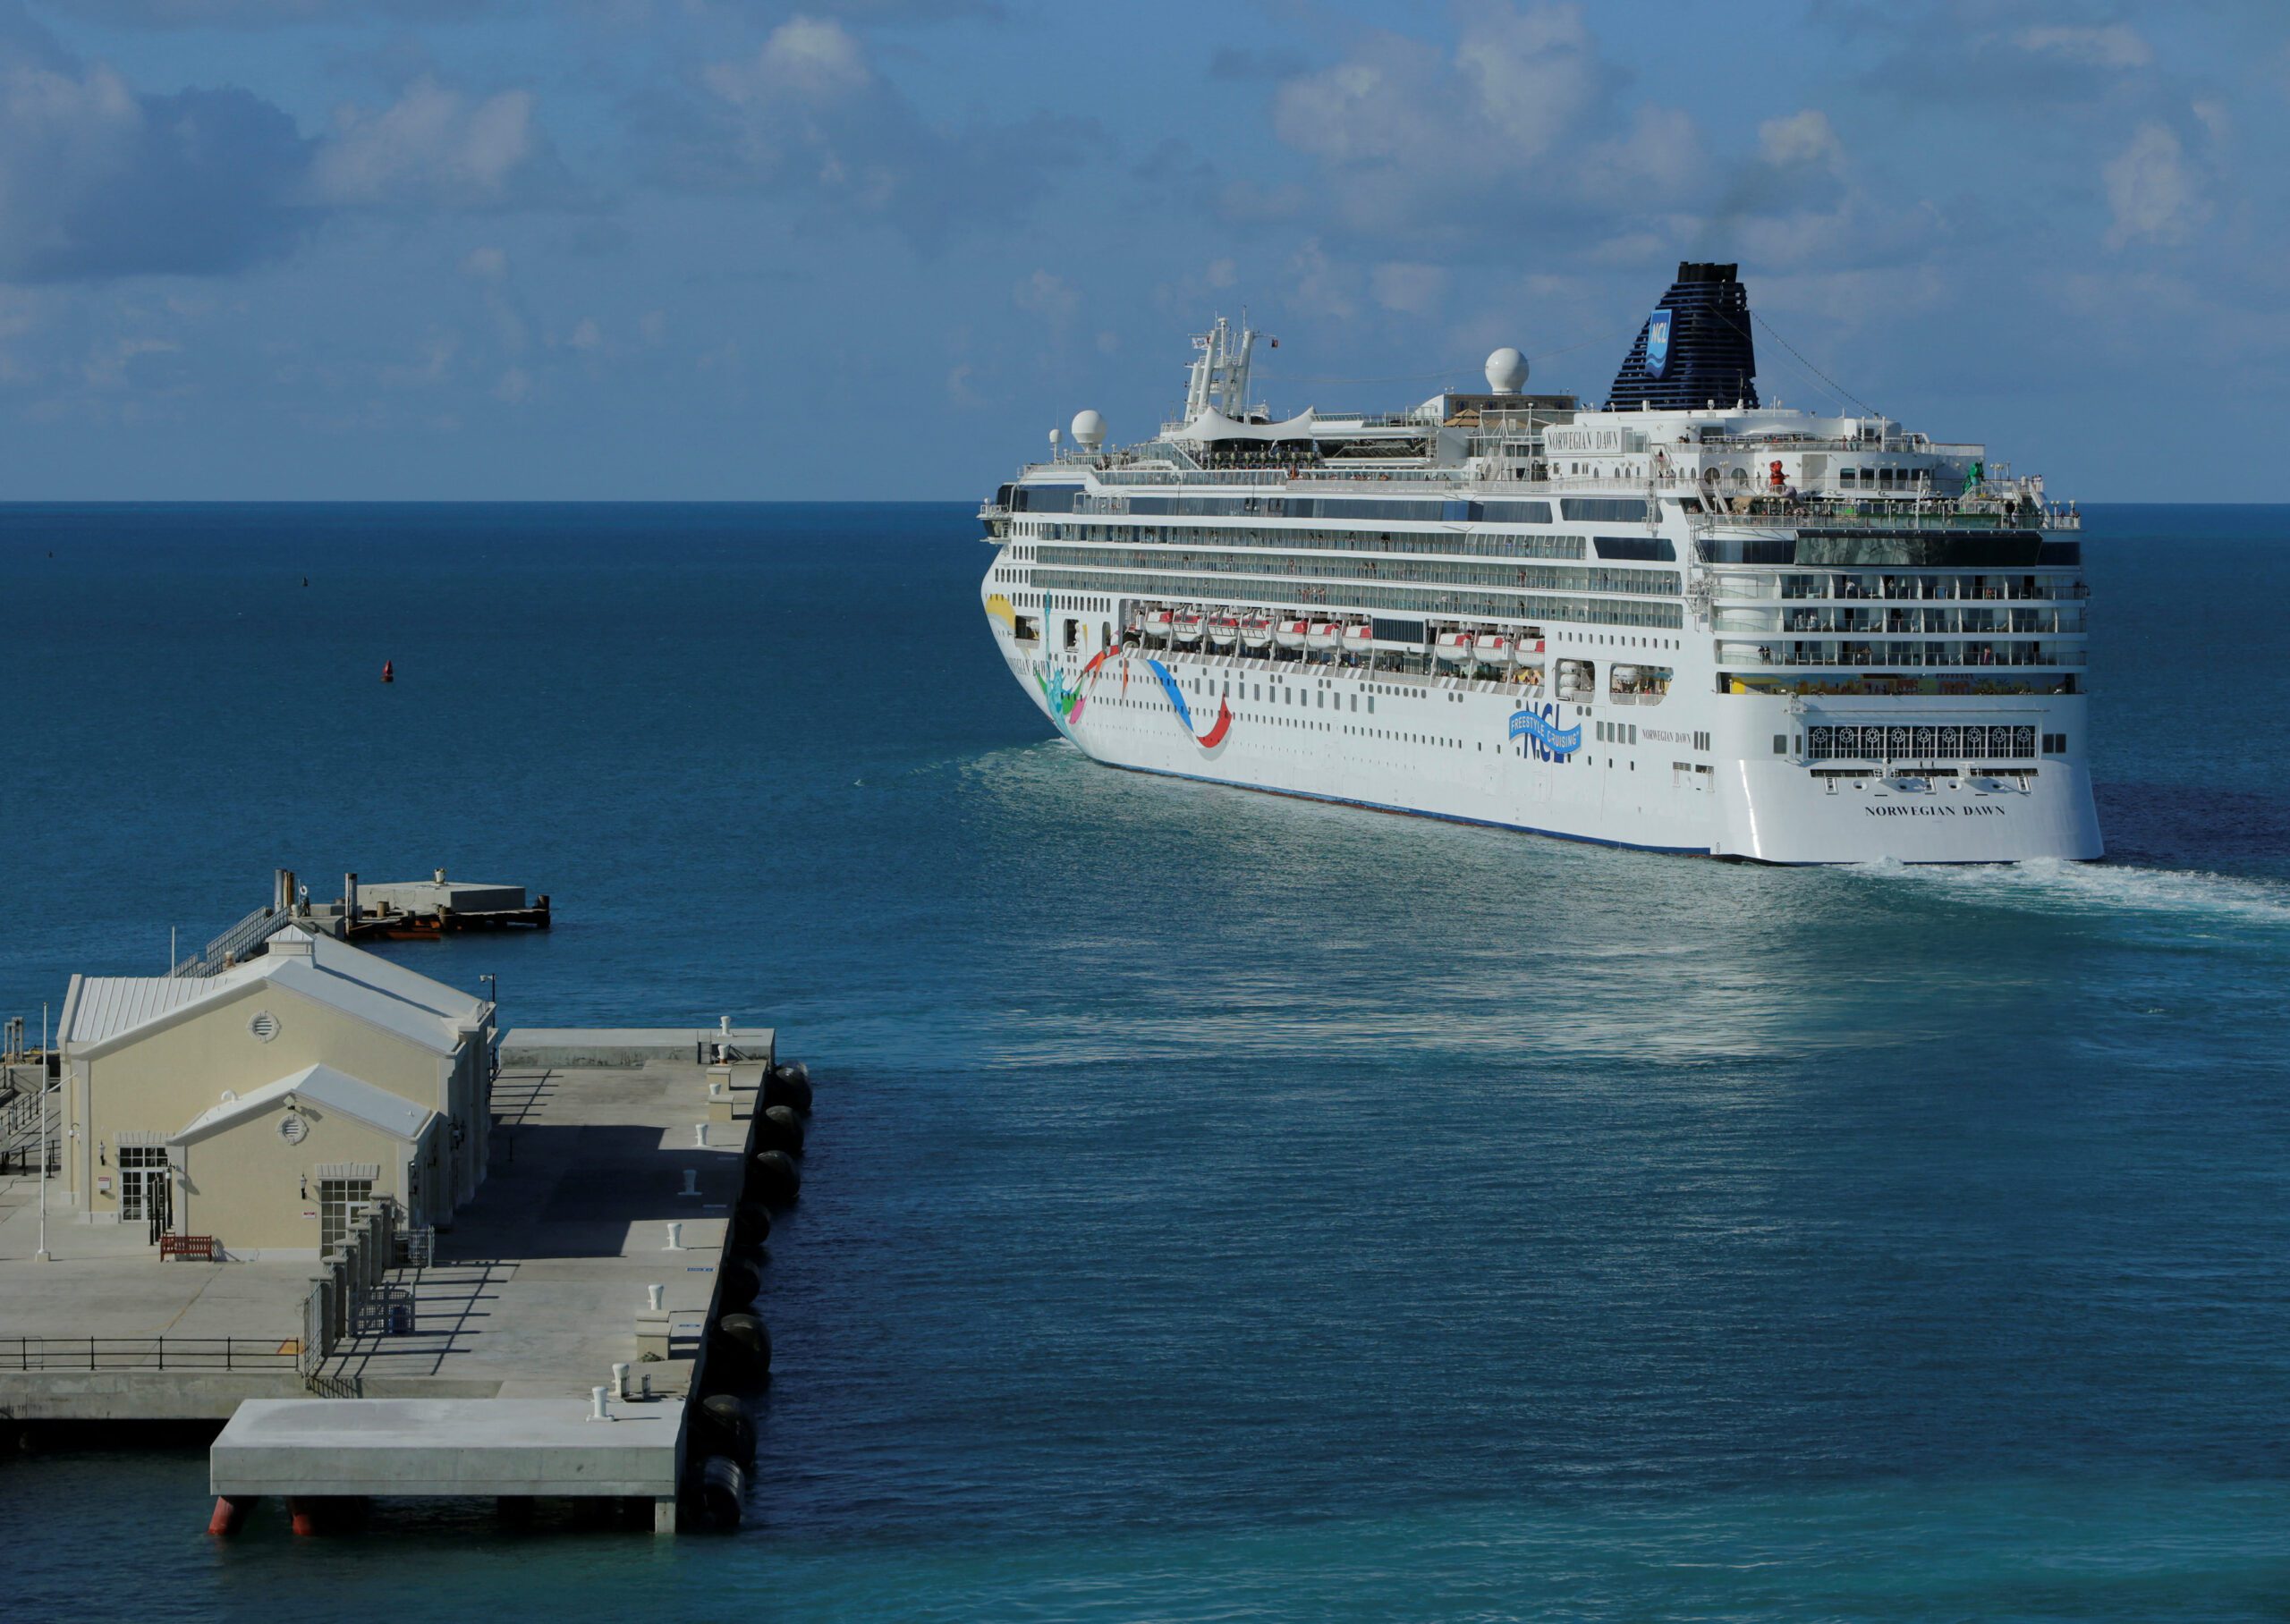 Mauritius Clears Norwegian Dawn to Dock After Cholera Scare